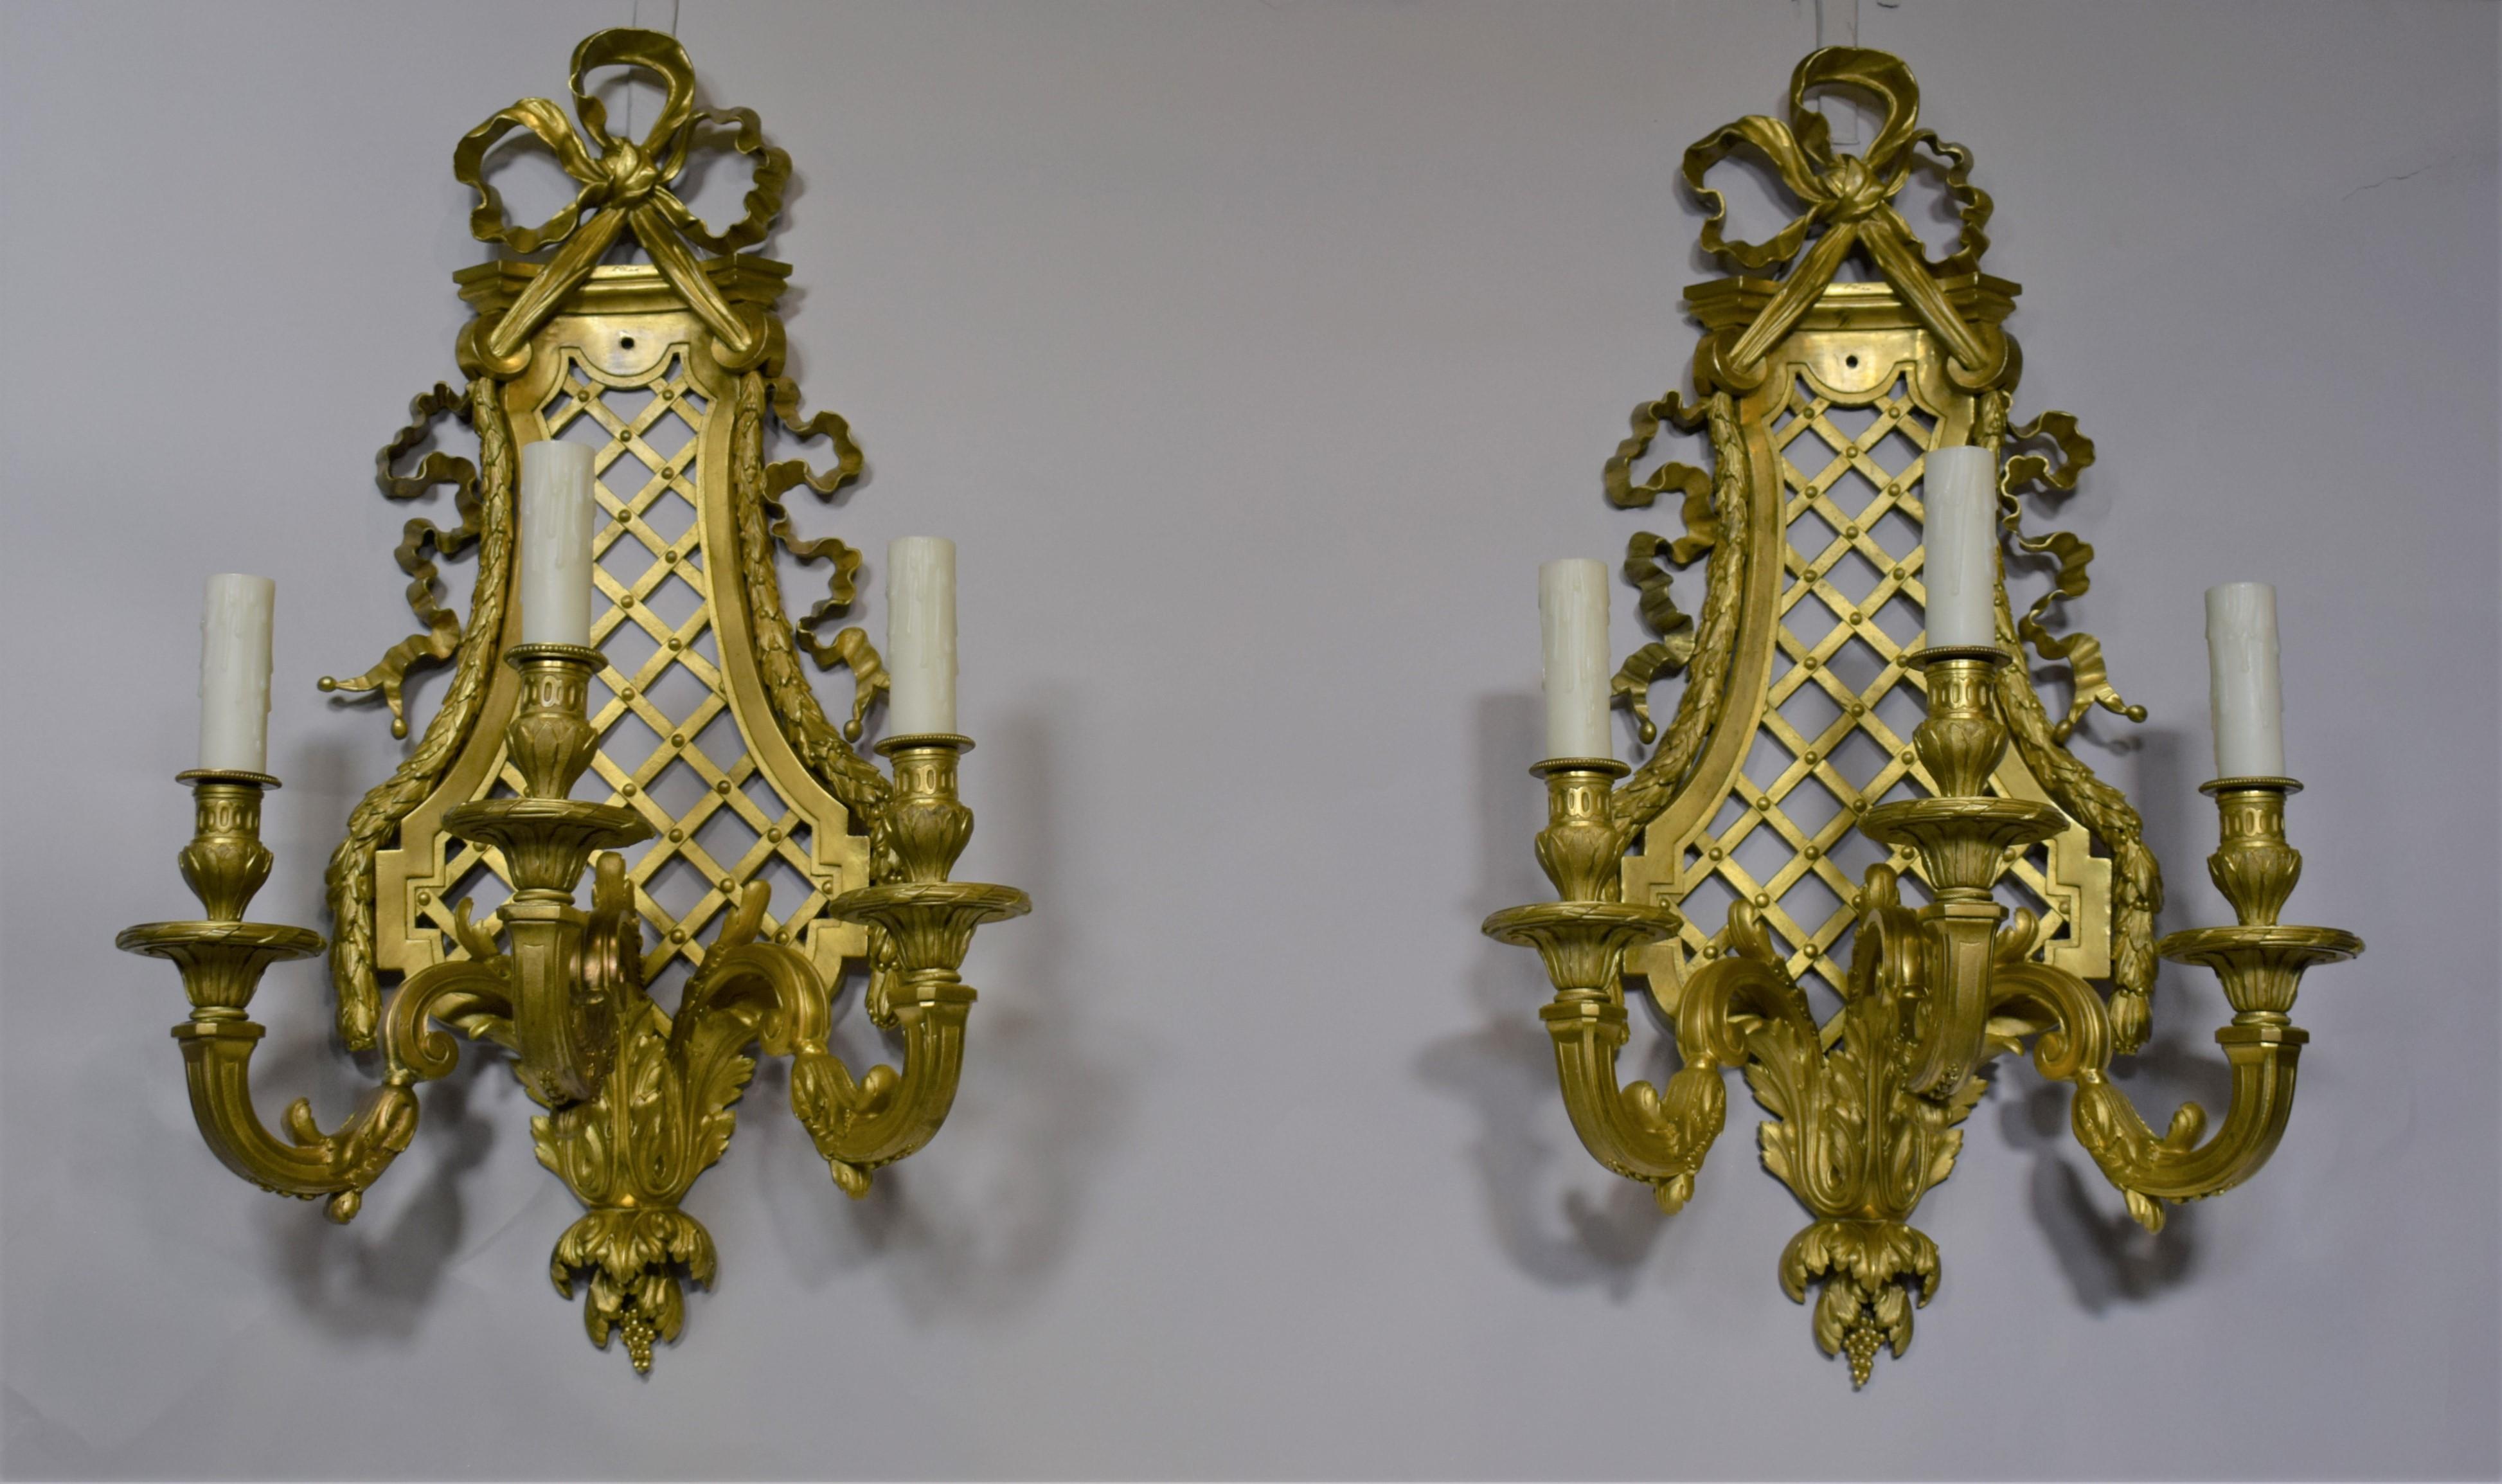 Pair of Louis XVI style gilt bronze wall sconces by Henri Vian. Exquisite Ribbon Detail and Trellis work. France, circa 1900.
Dimensions:
CW4947.